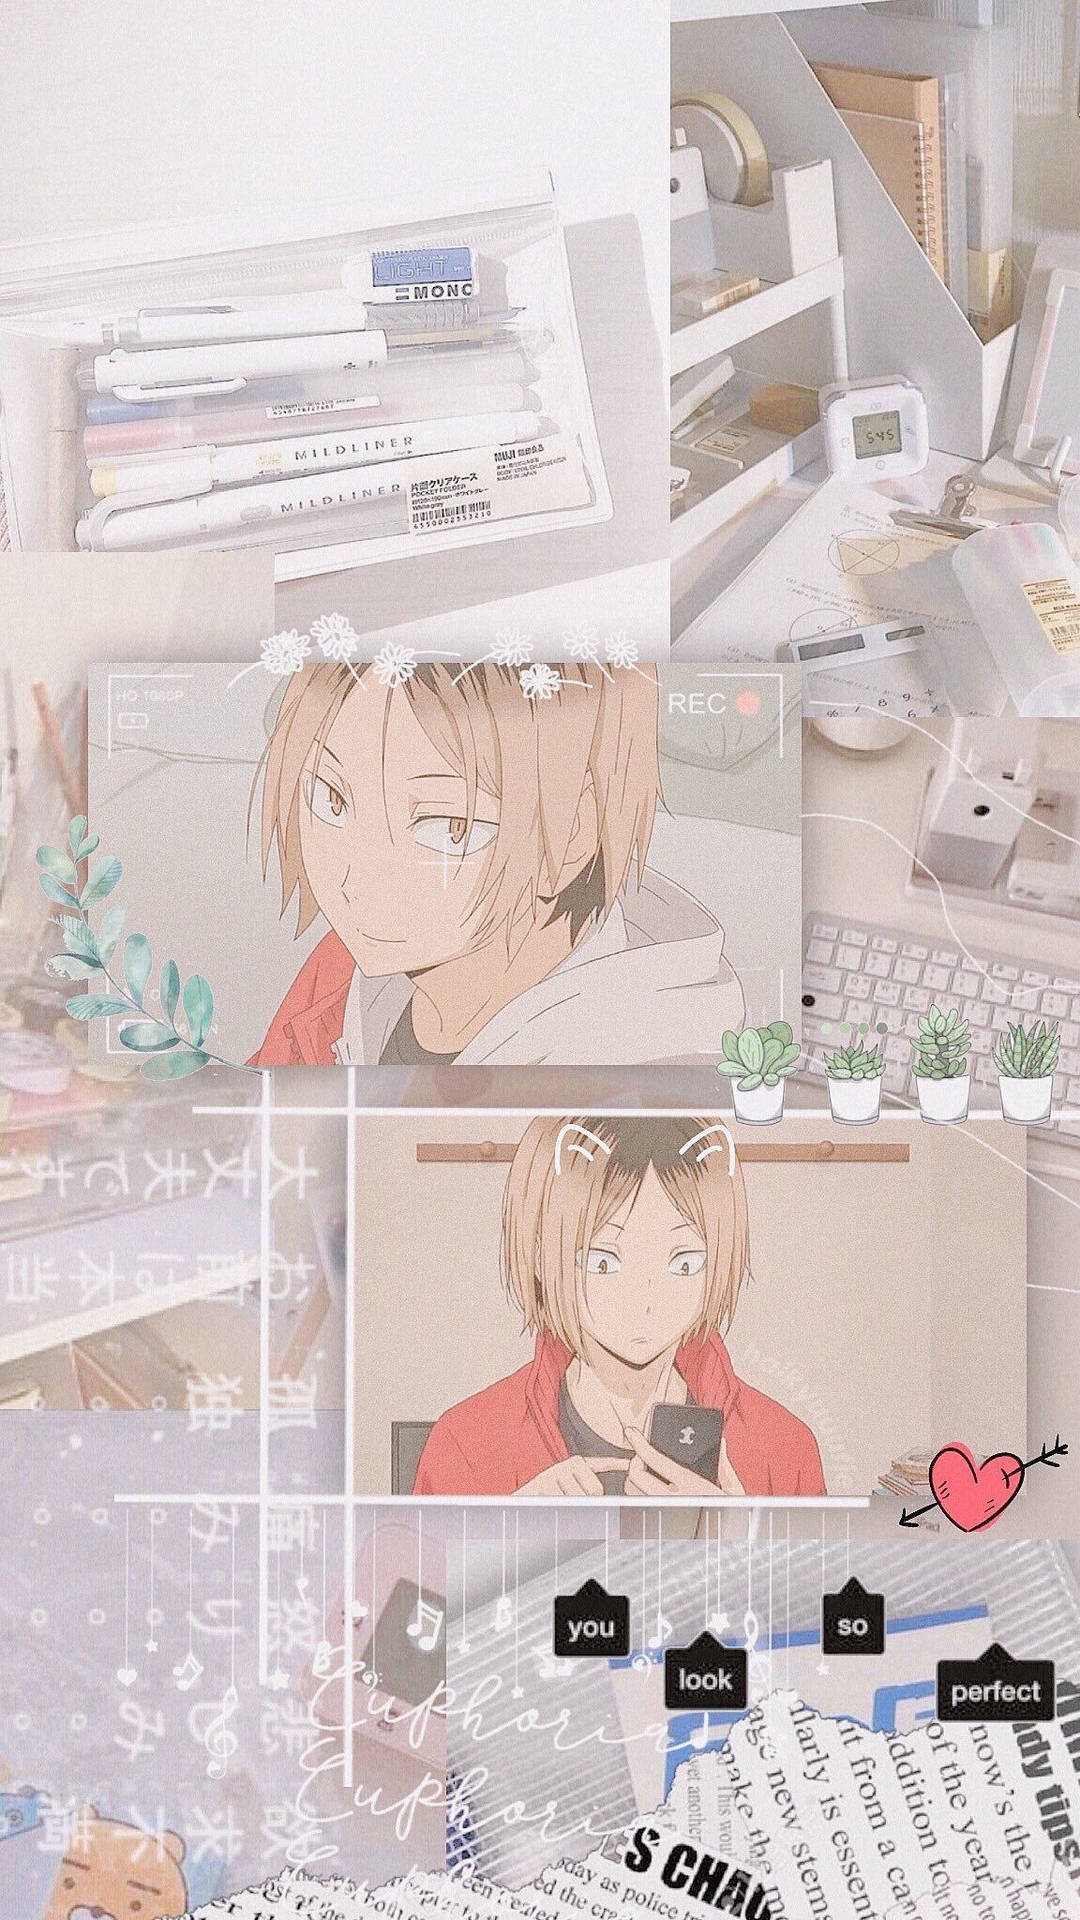 30 Kenma Kozume HD Wallpapers and Backgrounds